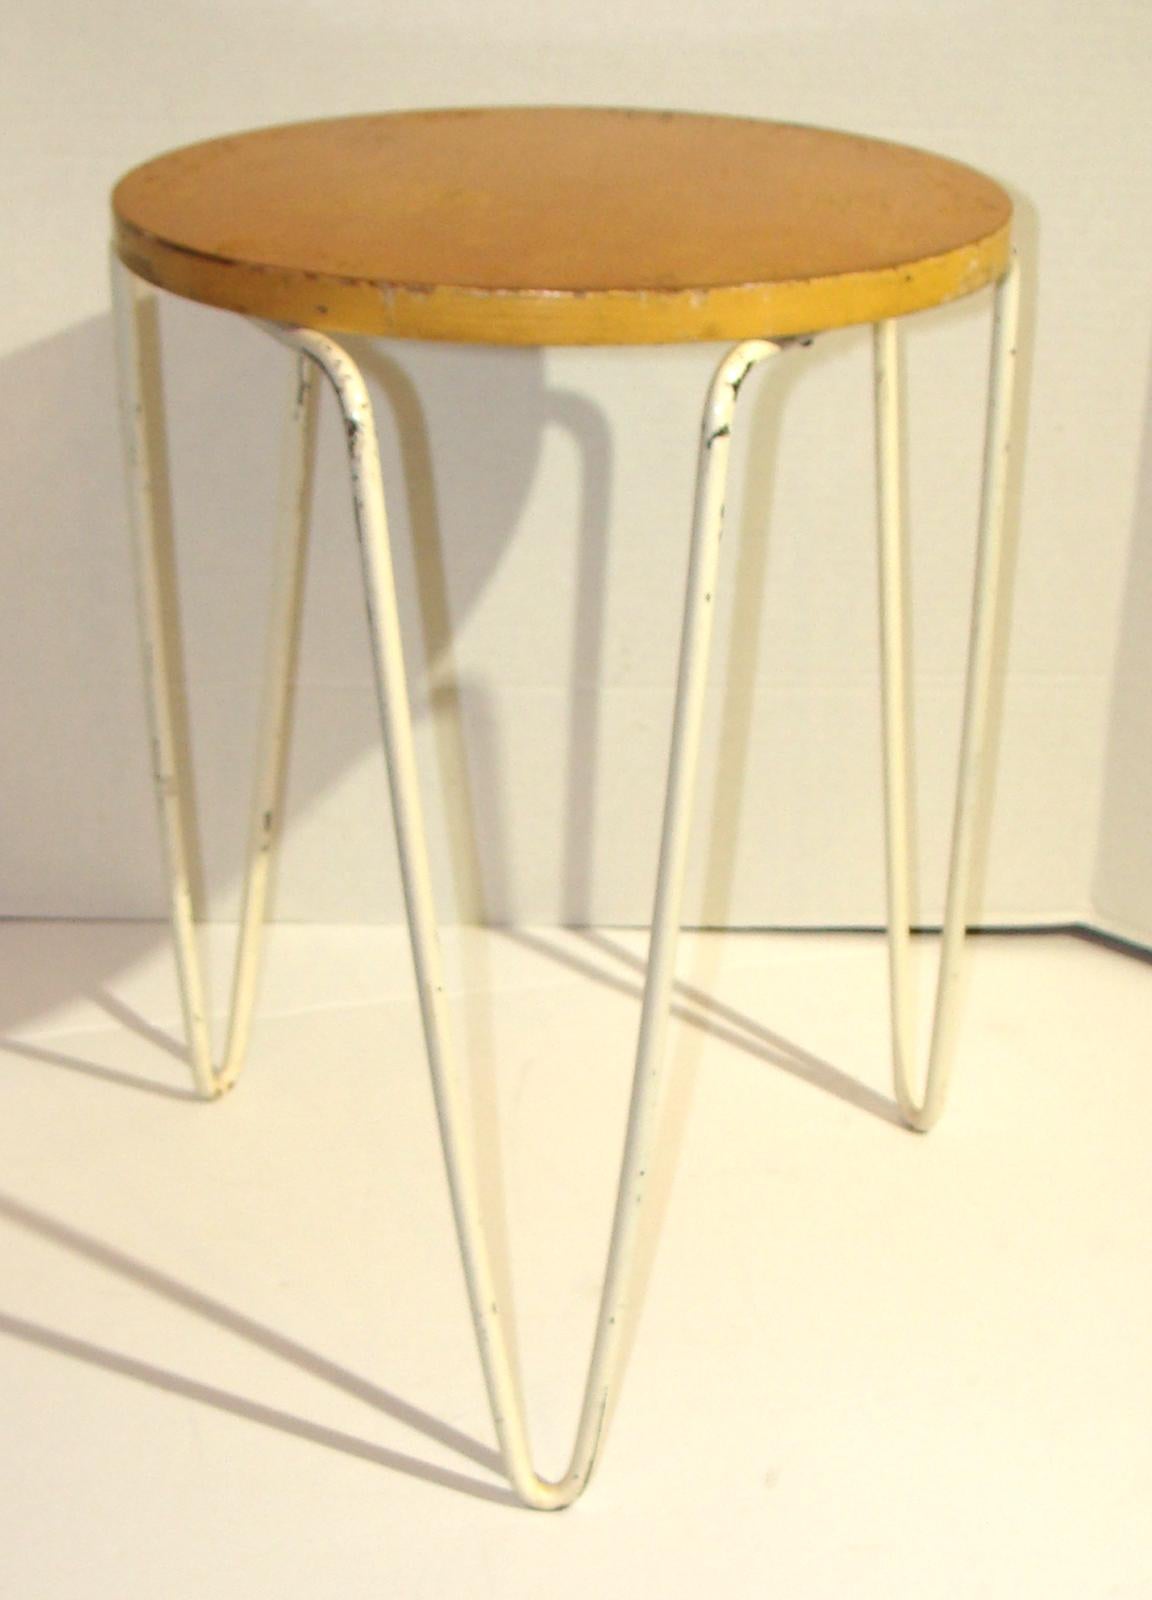 Original Florence Knoll model 75 stacking table (or Stool) in fine, unrestored vintage condition. Birch top with white enameled hairpin legs. Design originates 1947-1948. Retains 